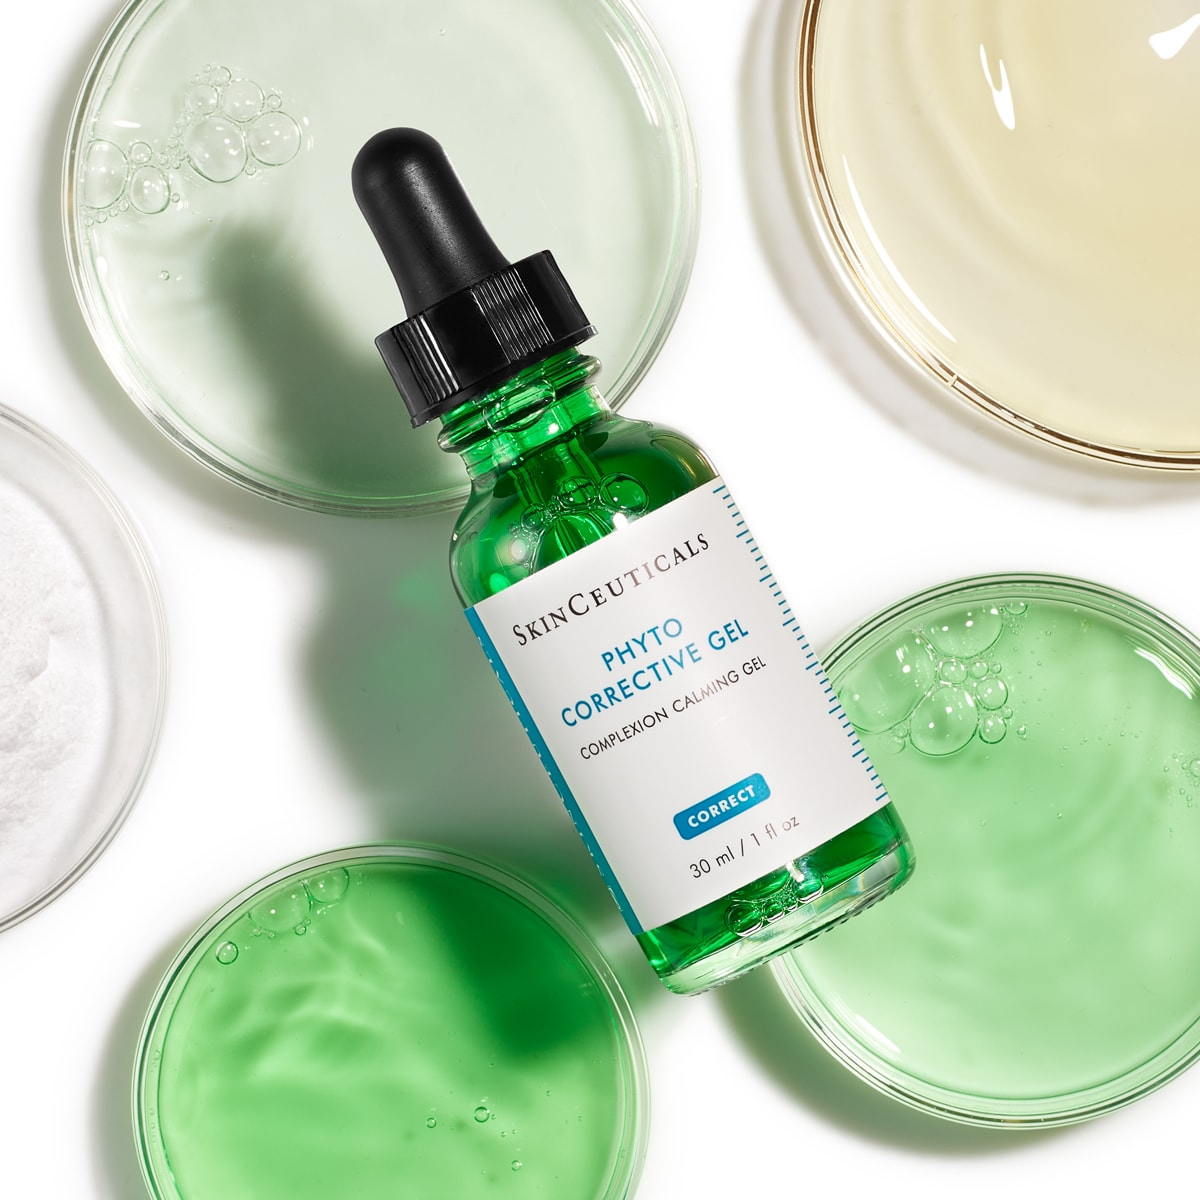 FREE Sample of SkinCeuticals Phyto Corrective Gel